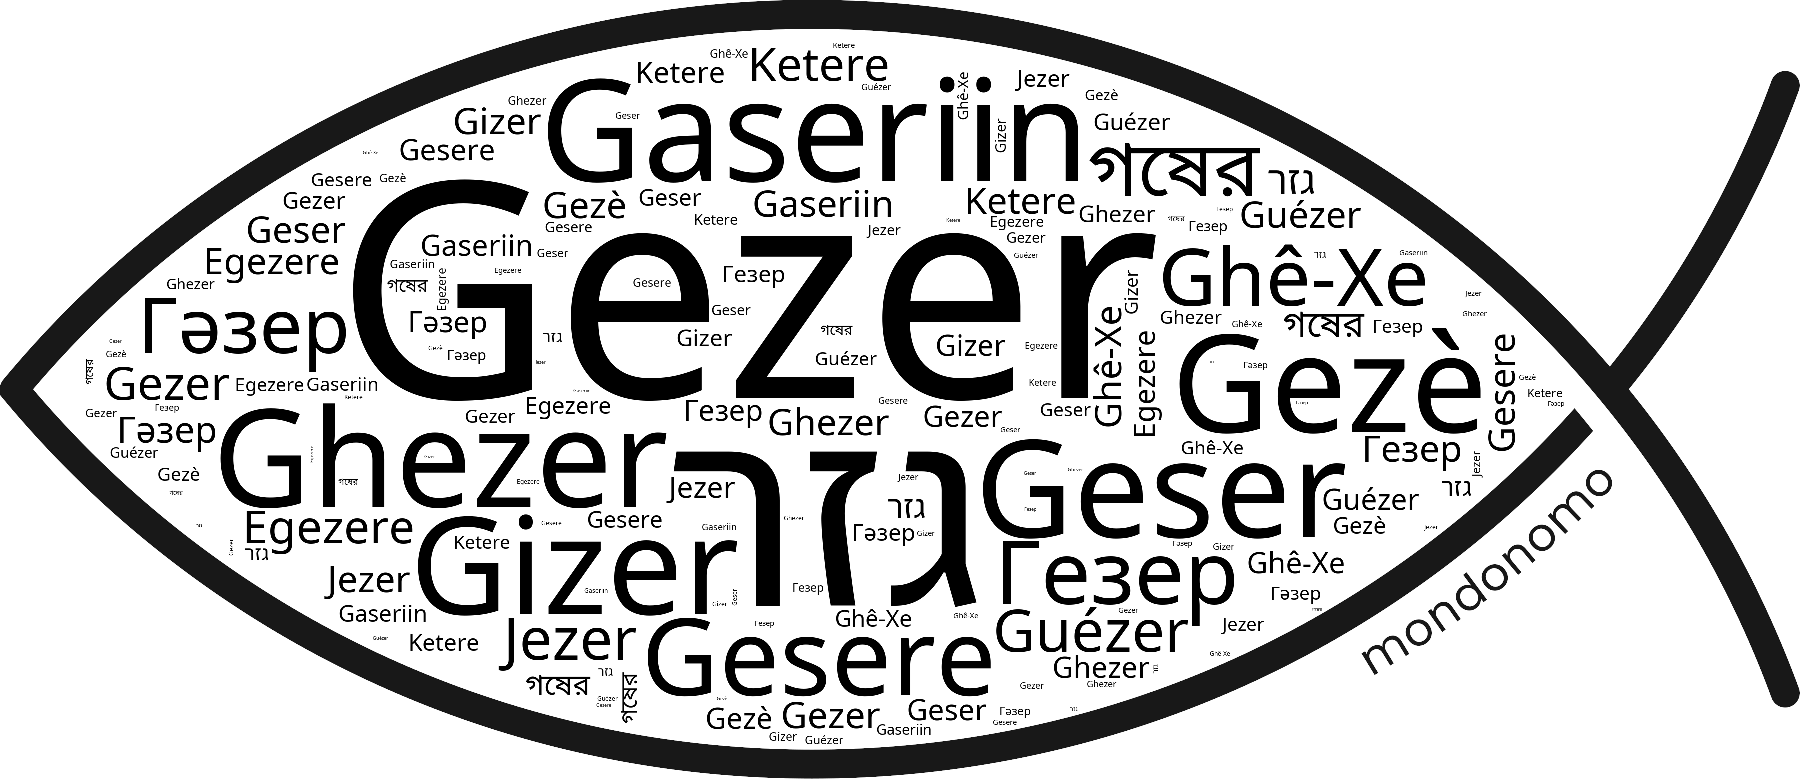 Name Gezer in the world's Bibles